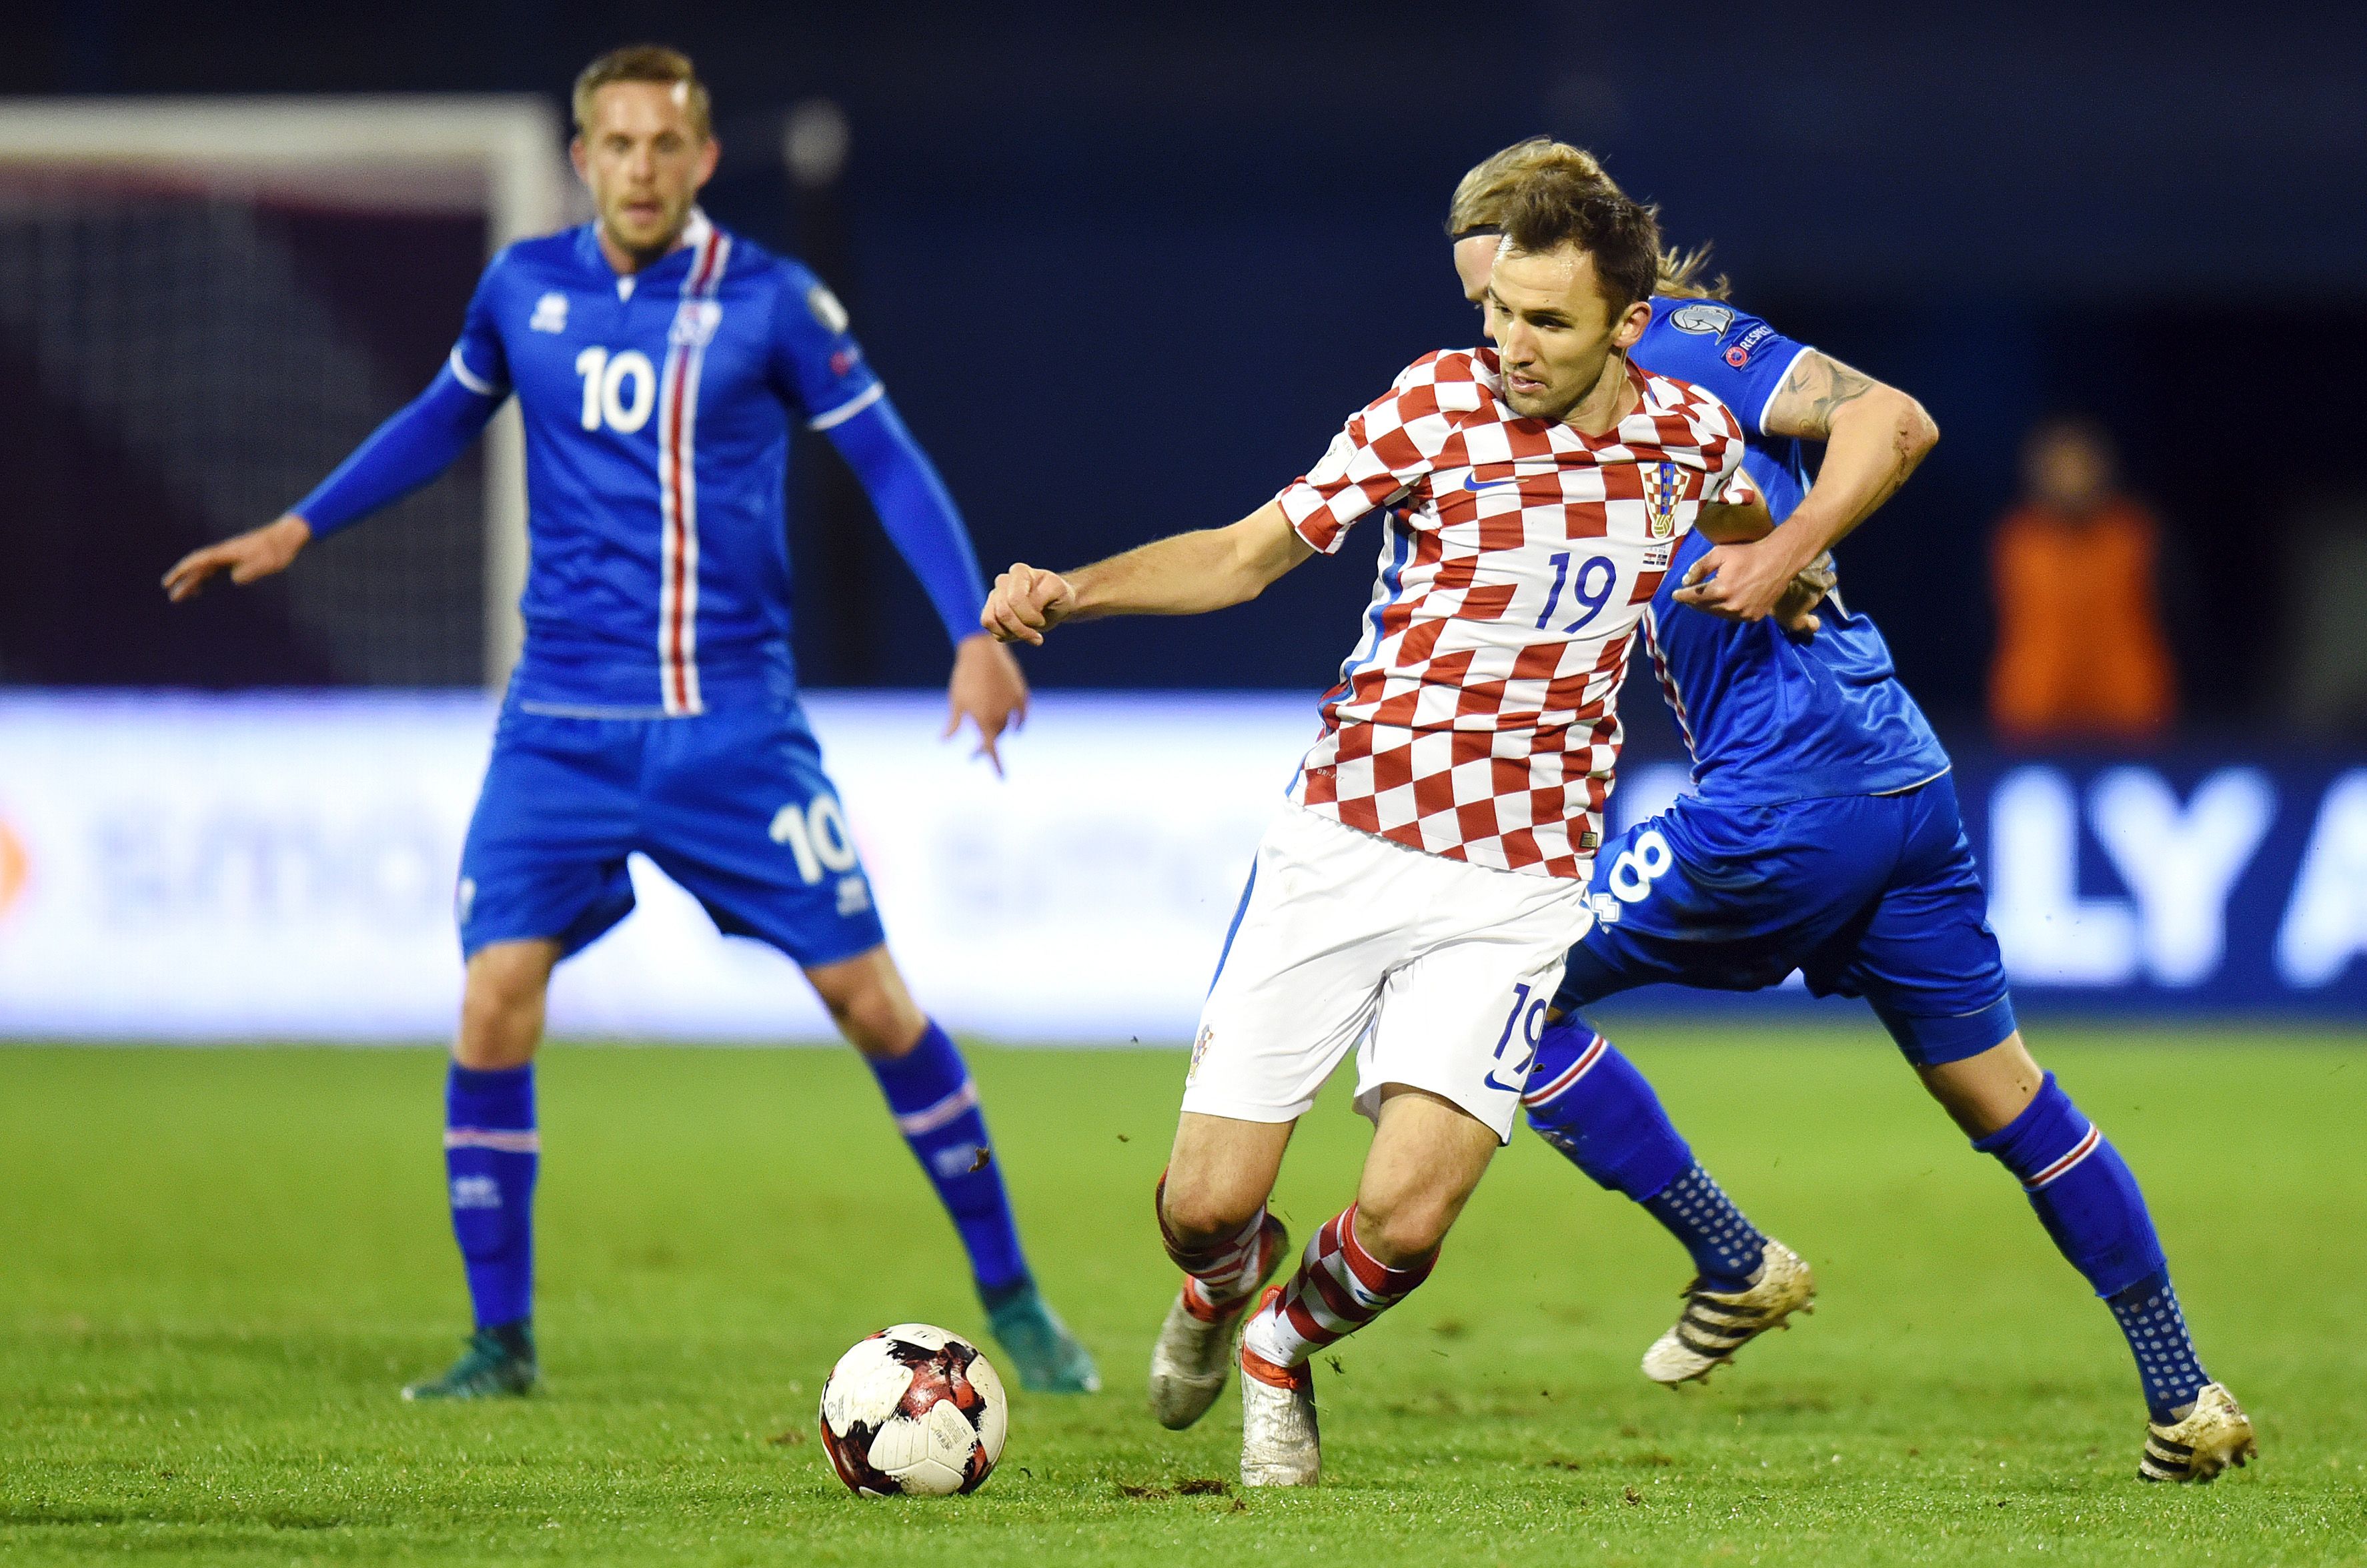 Iceland's midfiielder Birkir Bjonarsson (R) vies with Croatia's midfielder Milan Badelj during the 2018 World Cup football qualification match between Croatia and Iceland at the Maksimir stadium in Zagreb on November 12, 2016.  / AFP / STR        (Photo credit should read STR/AFP/Getty Images)